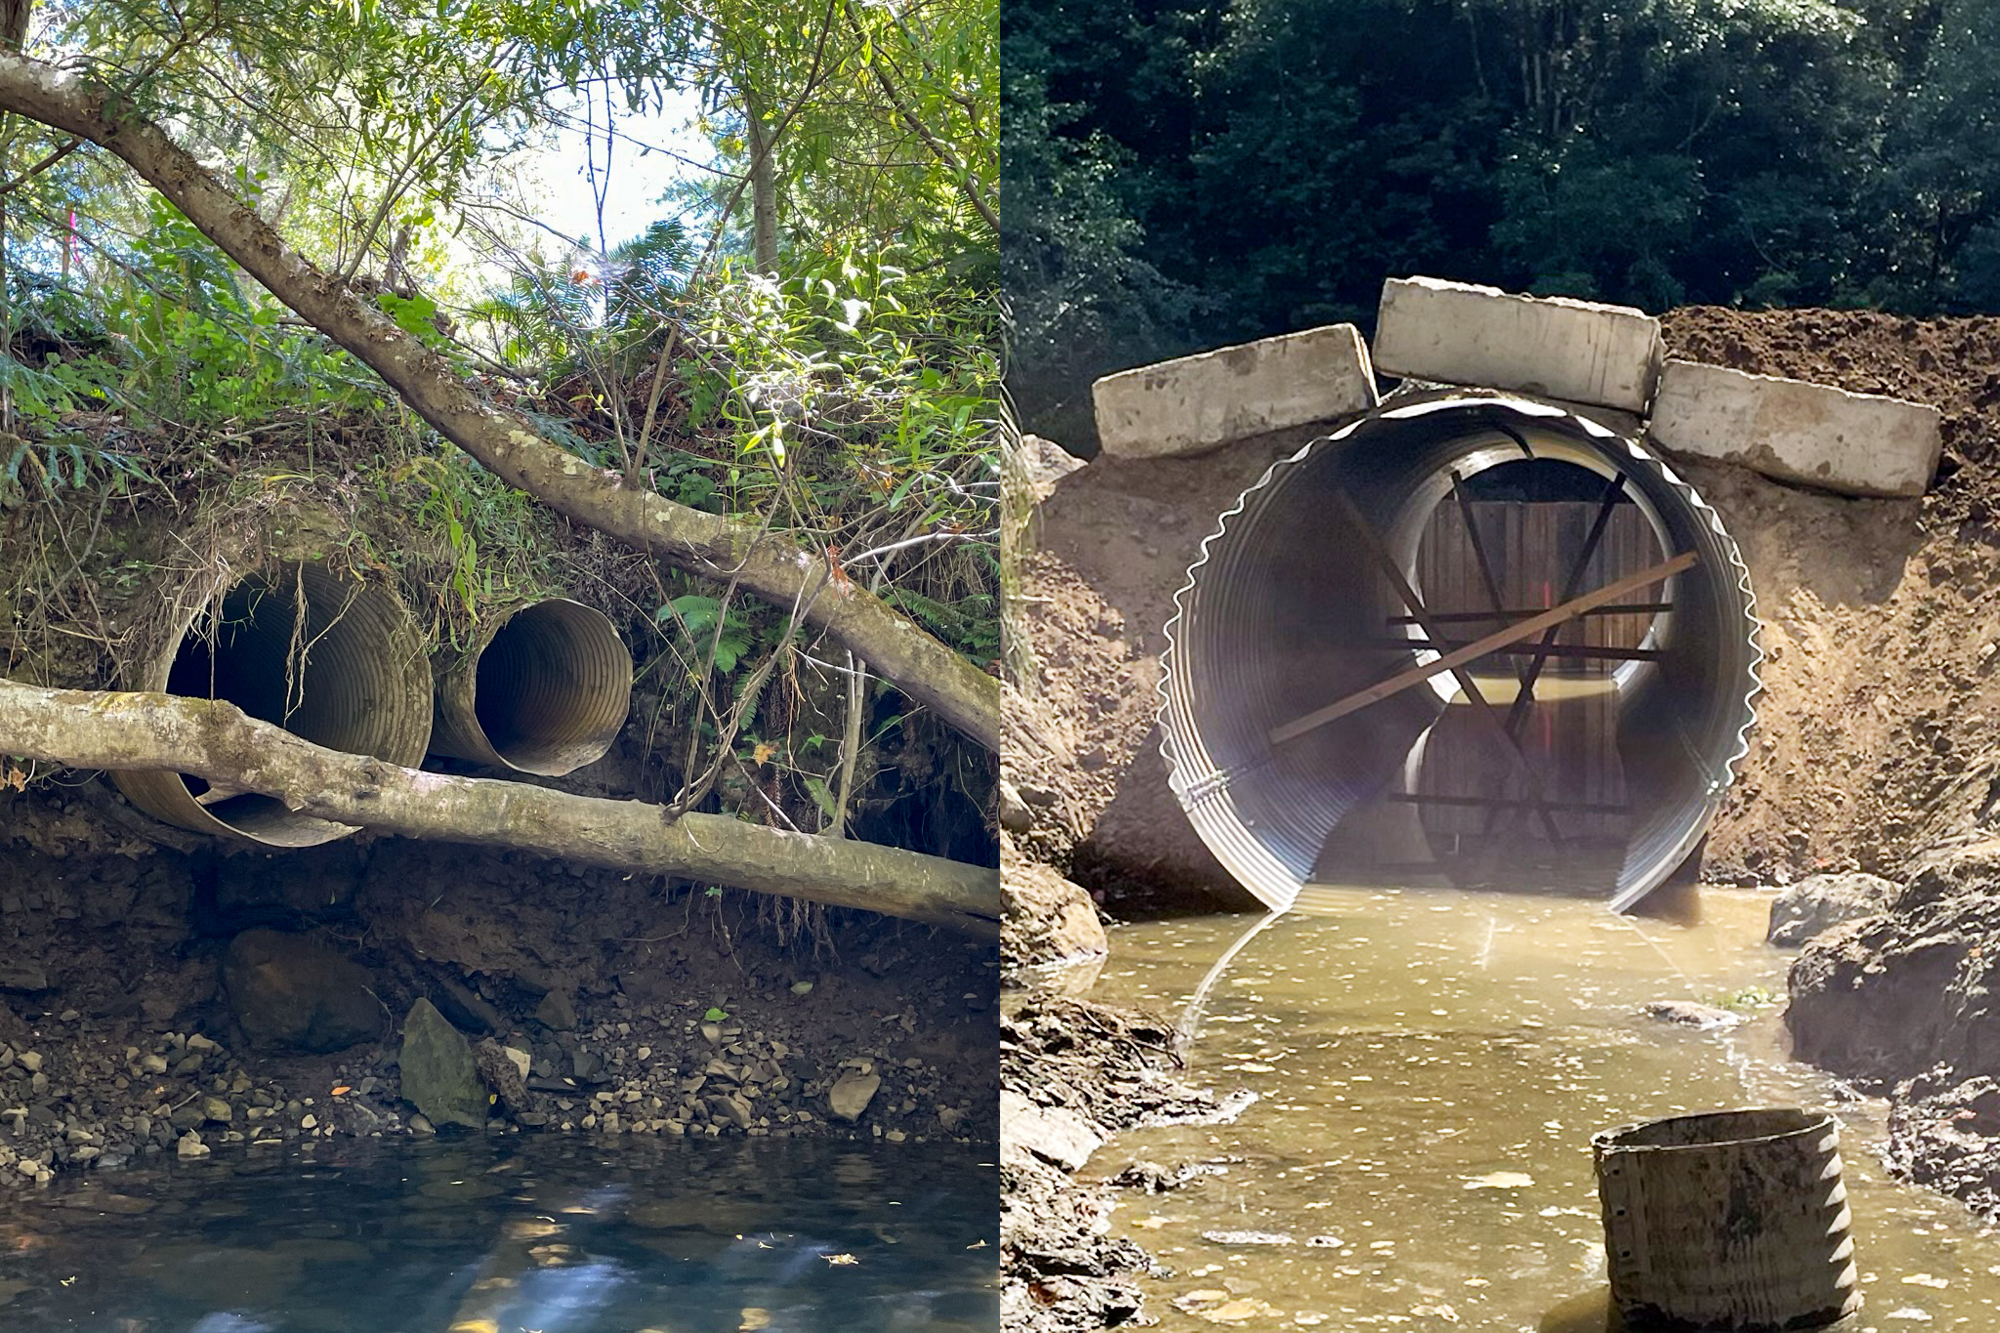 Orginal culverts at the Dry Dock Gulch site (left) versus the new culvert (right).